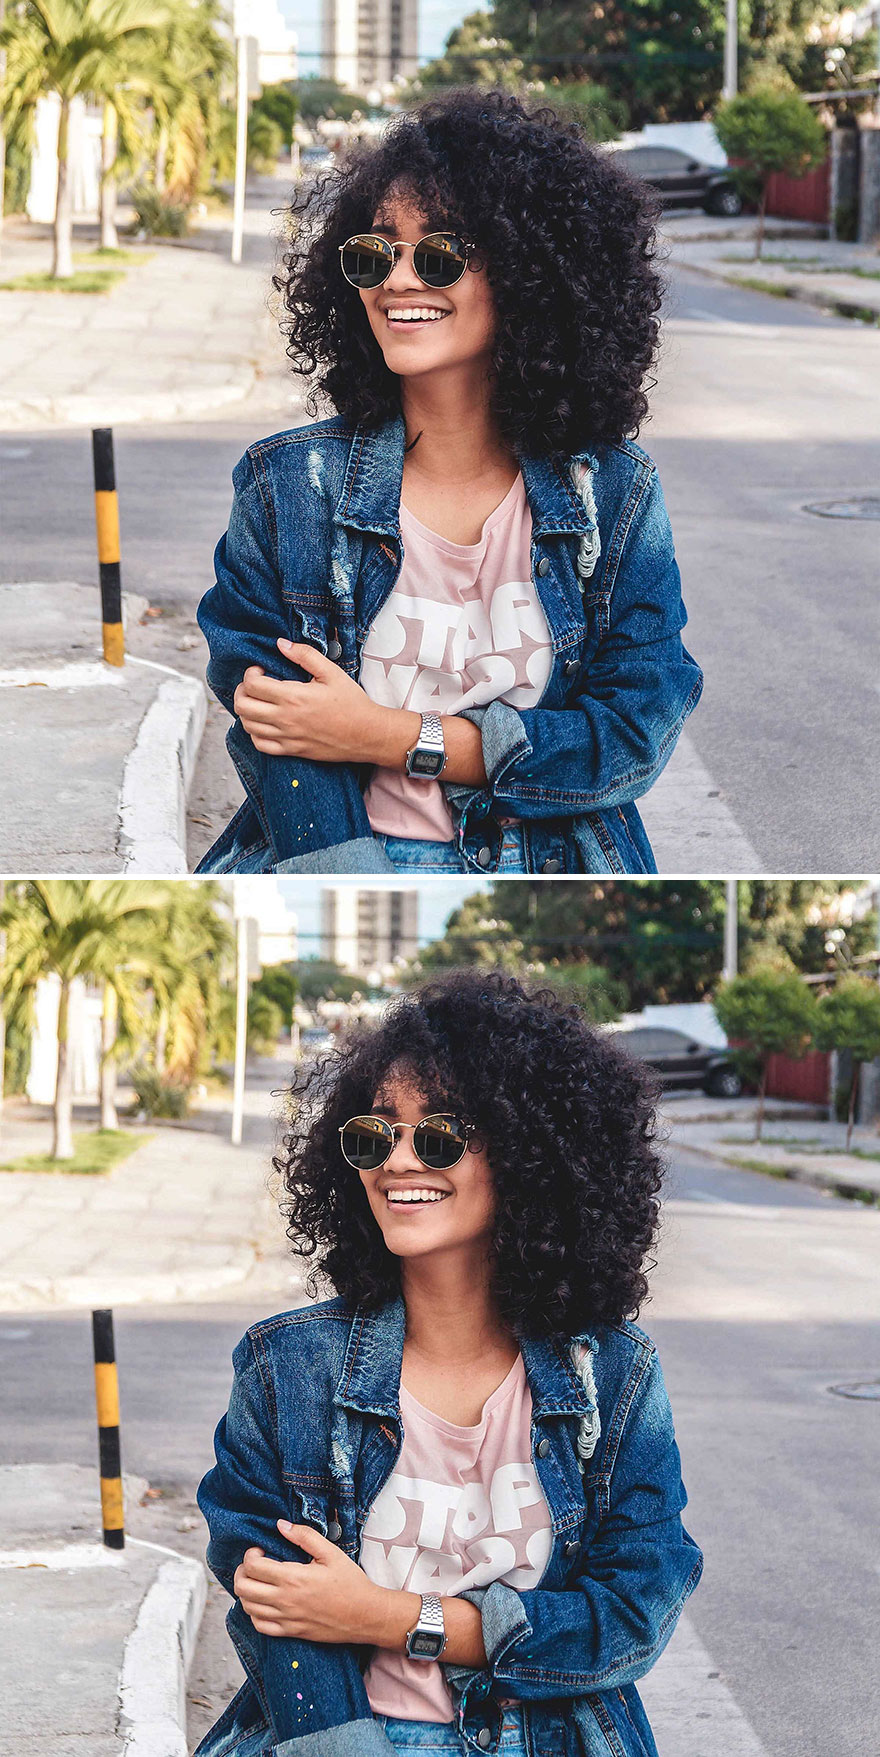 Smiling Woman (12 Differences)